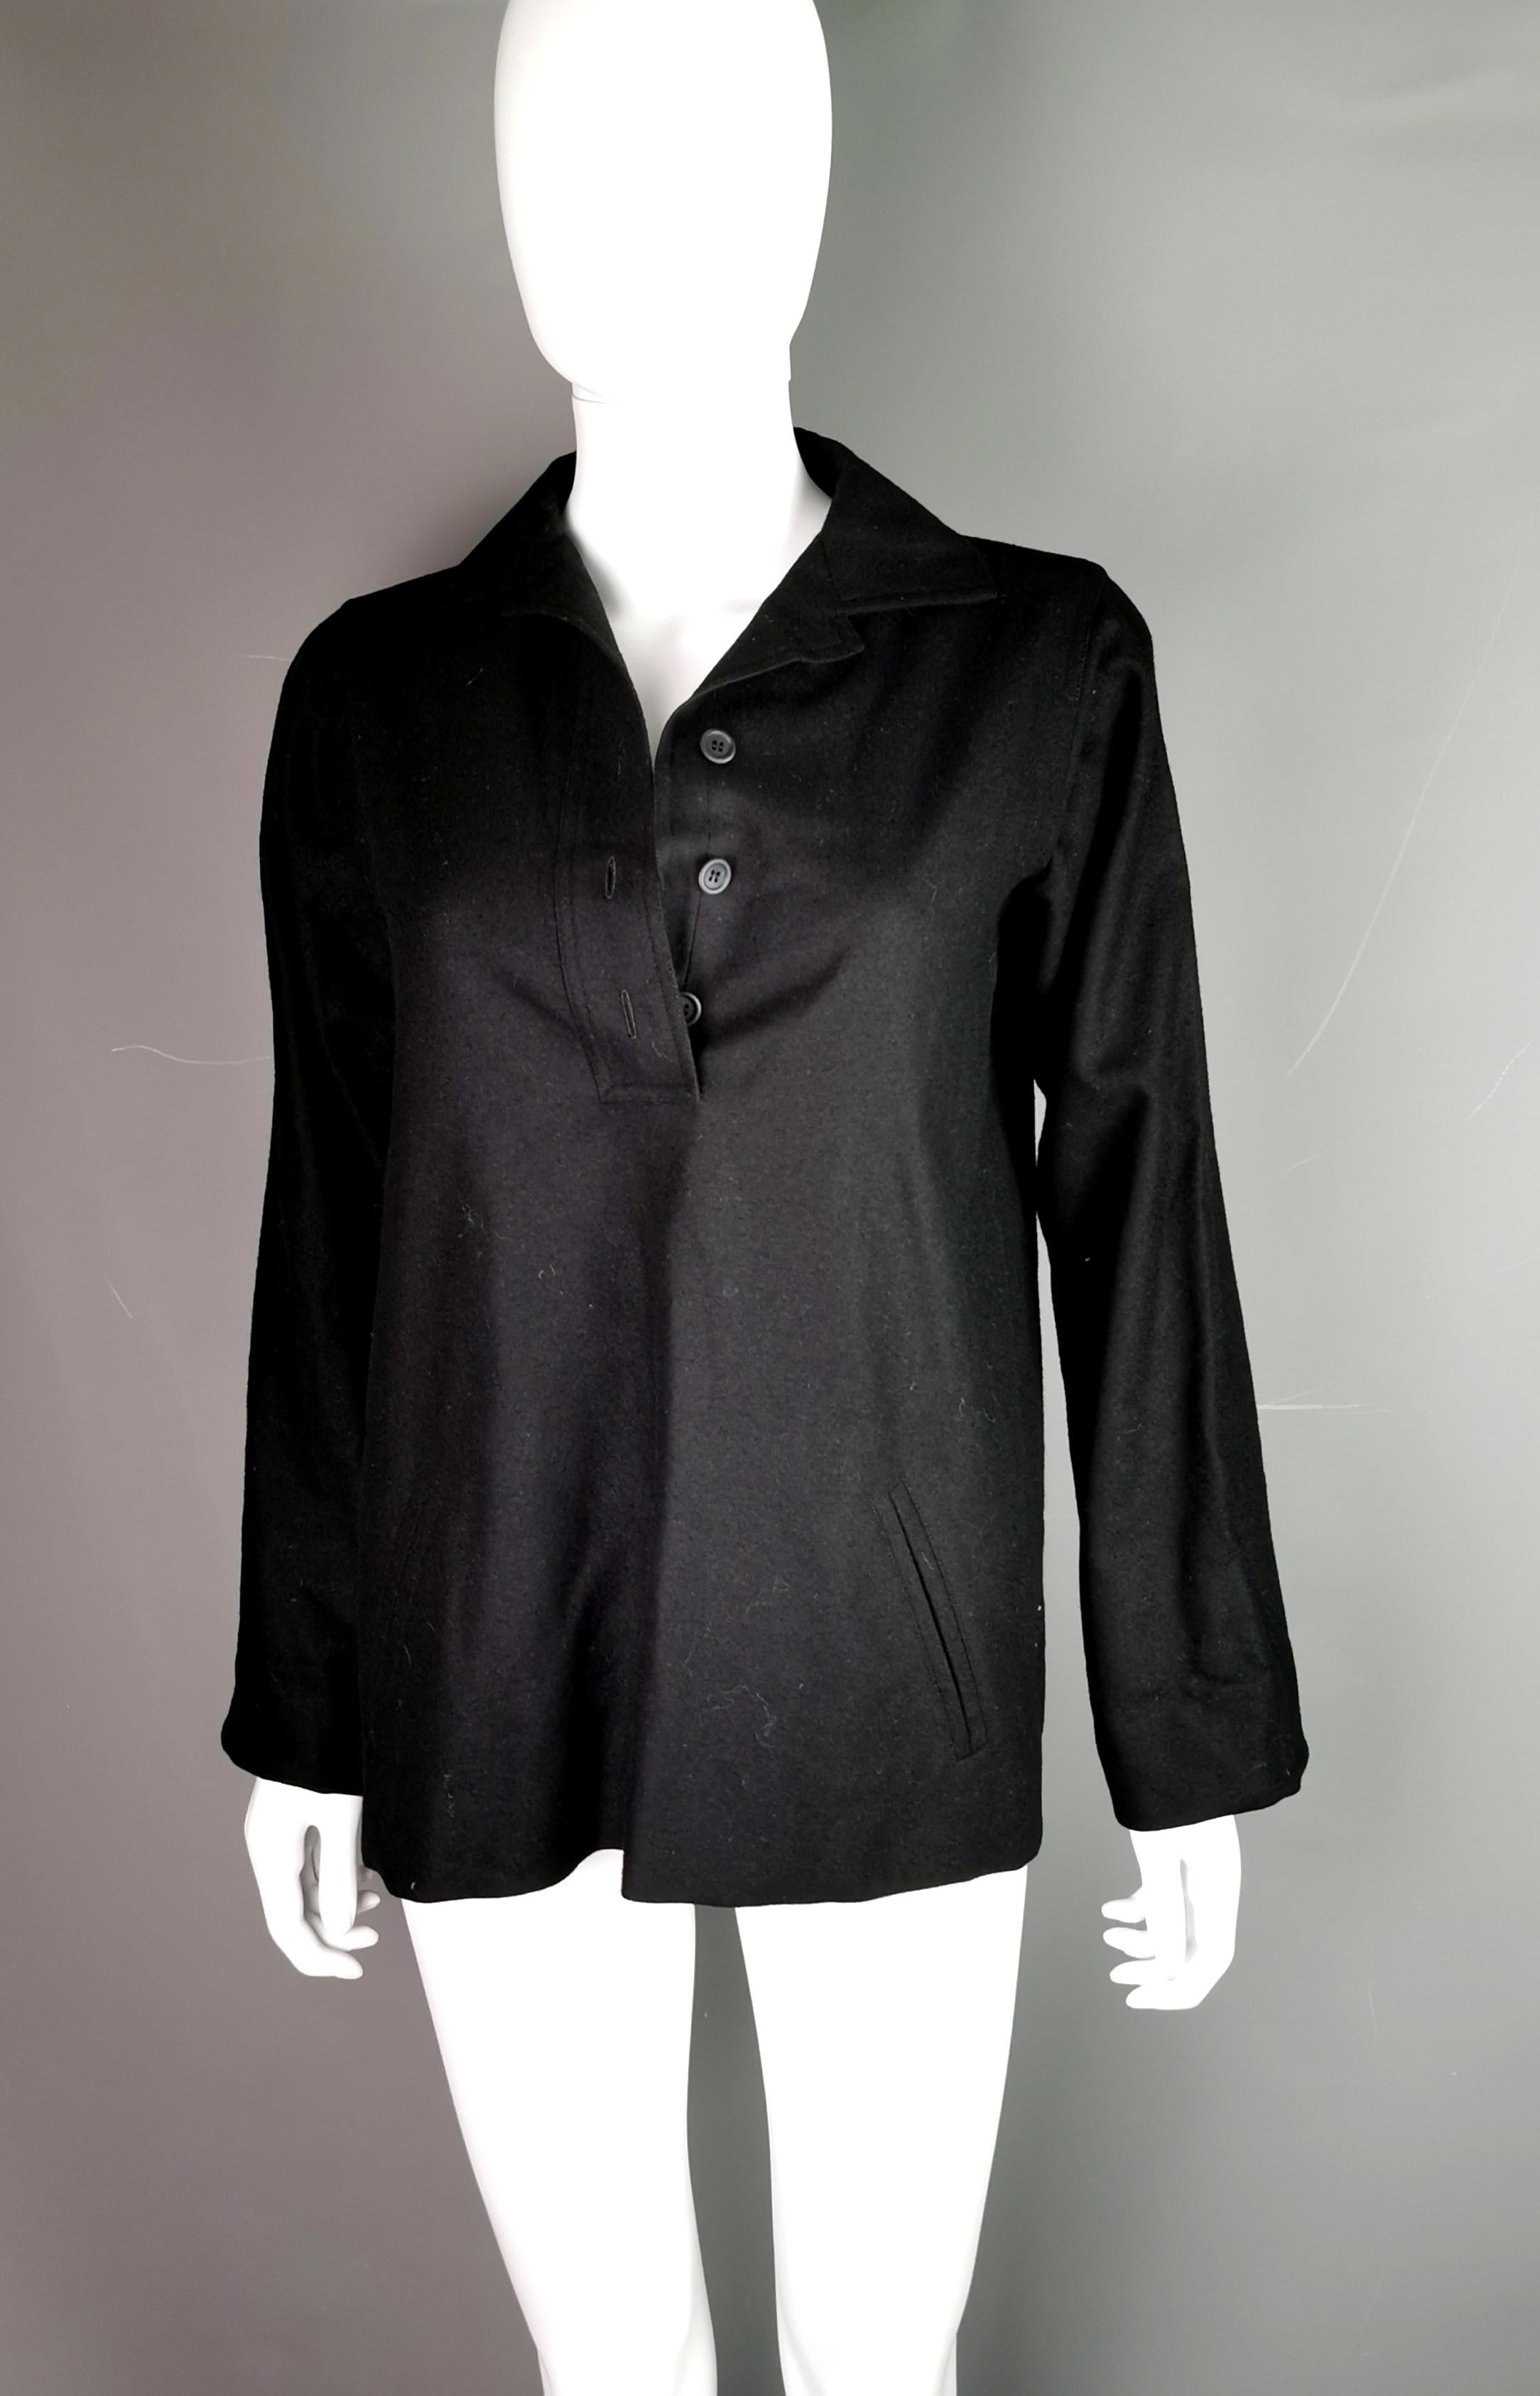 A stylish and versatile vintage YSL Rive Gauche smock style top.

It is a solid black colour with half button up front, buttoning with black plastic buttons and it is collared.

It has long sleeves that appear very slightly flared.

A great